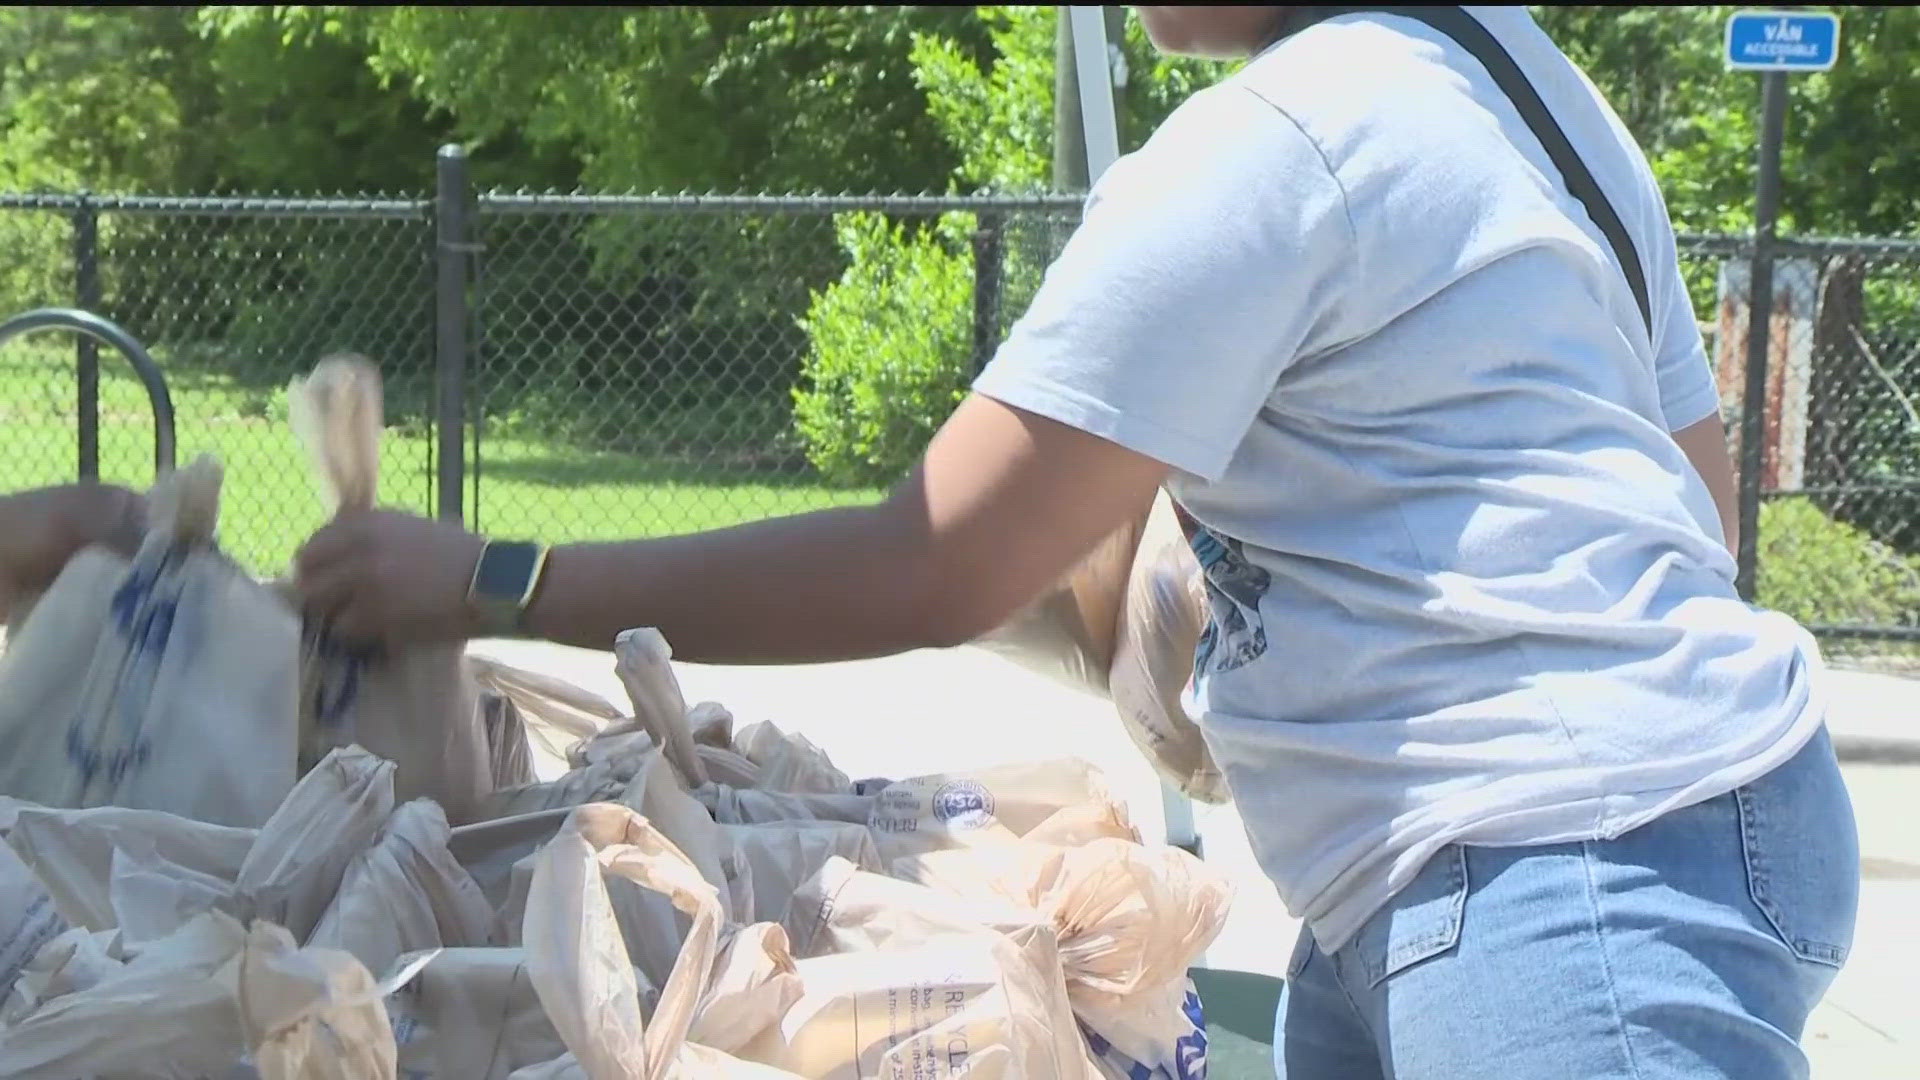 The county gave away almost 200,000 meals last summer.